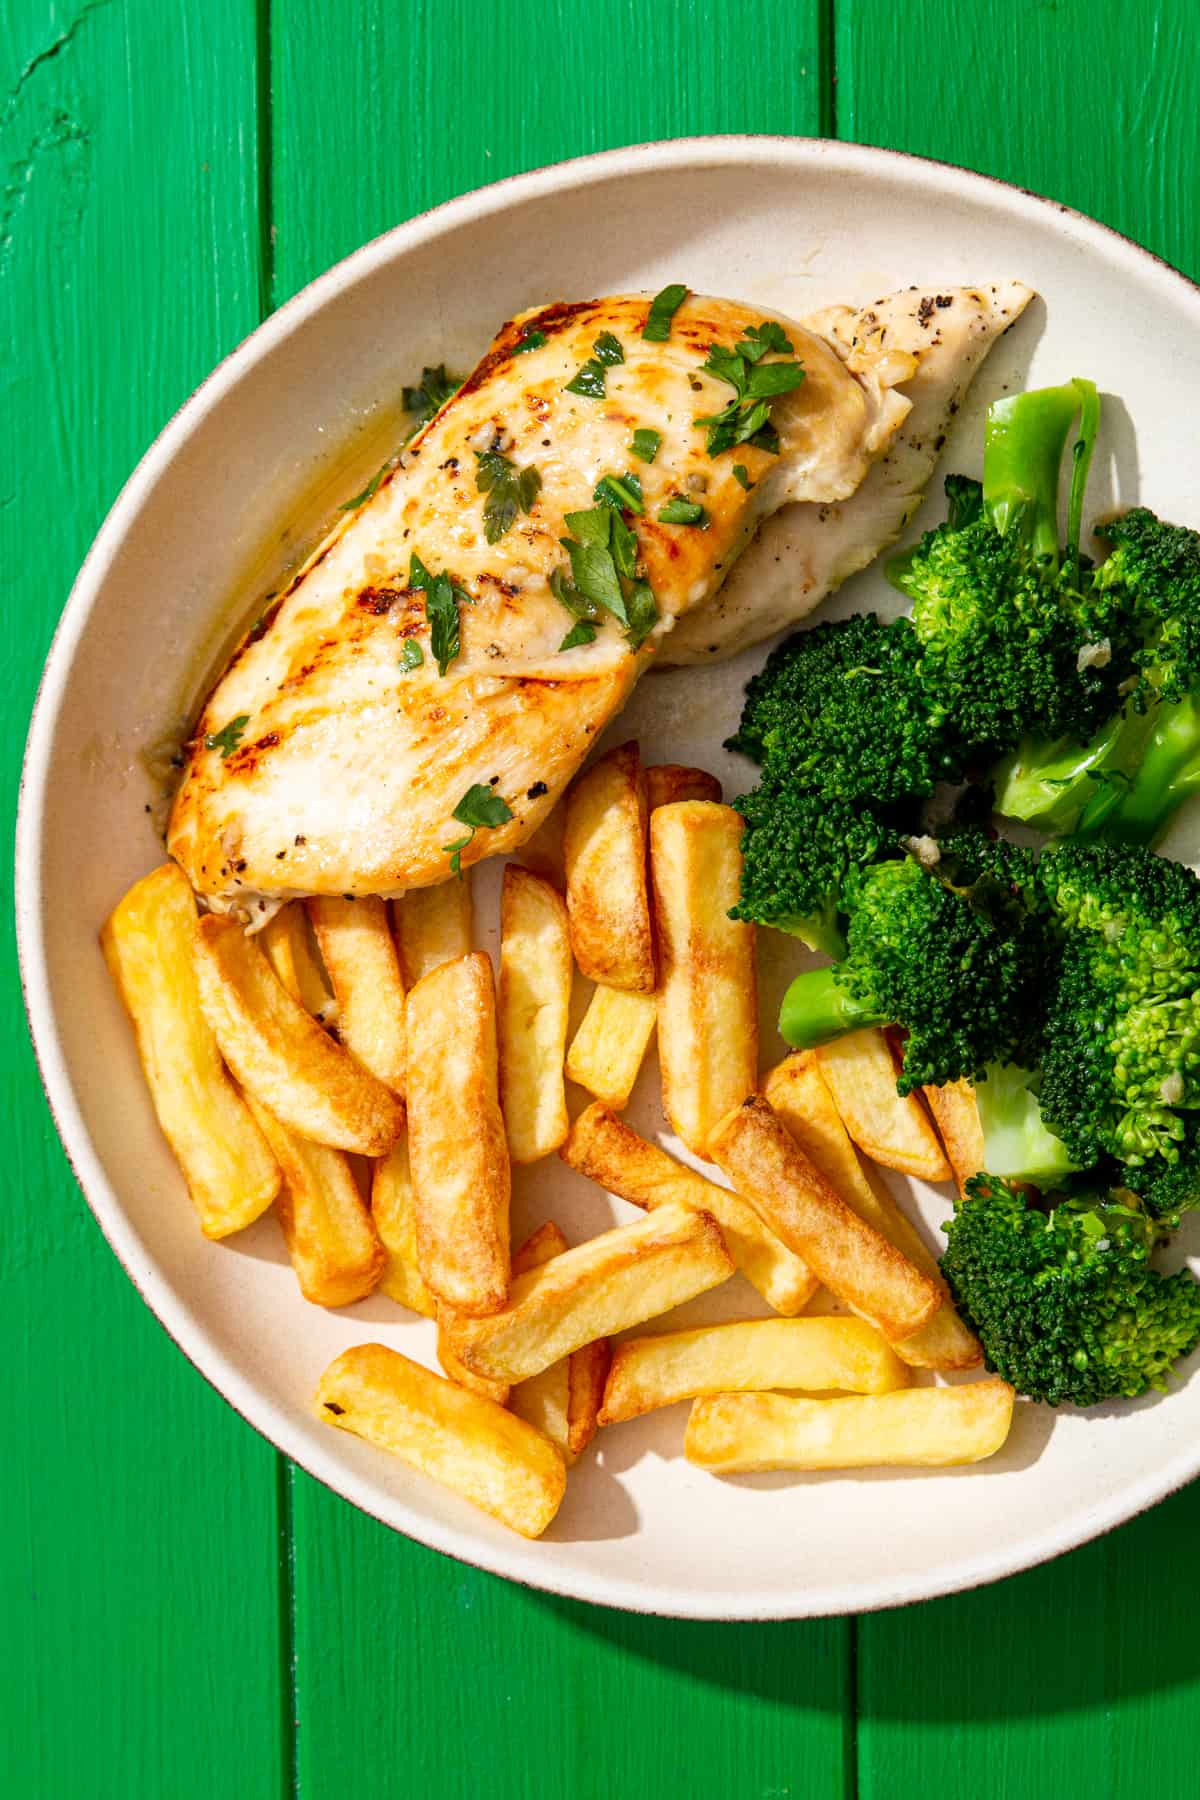 Golden browned chicken breast fillets with butter and parsley sauce  with fries and broccoli florets on a plate.